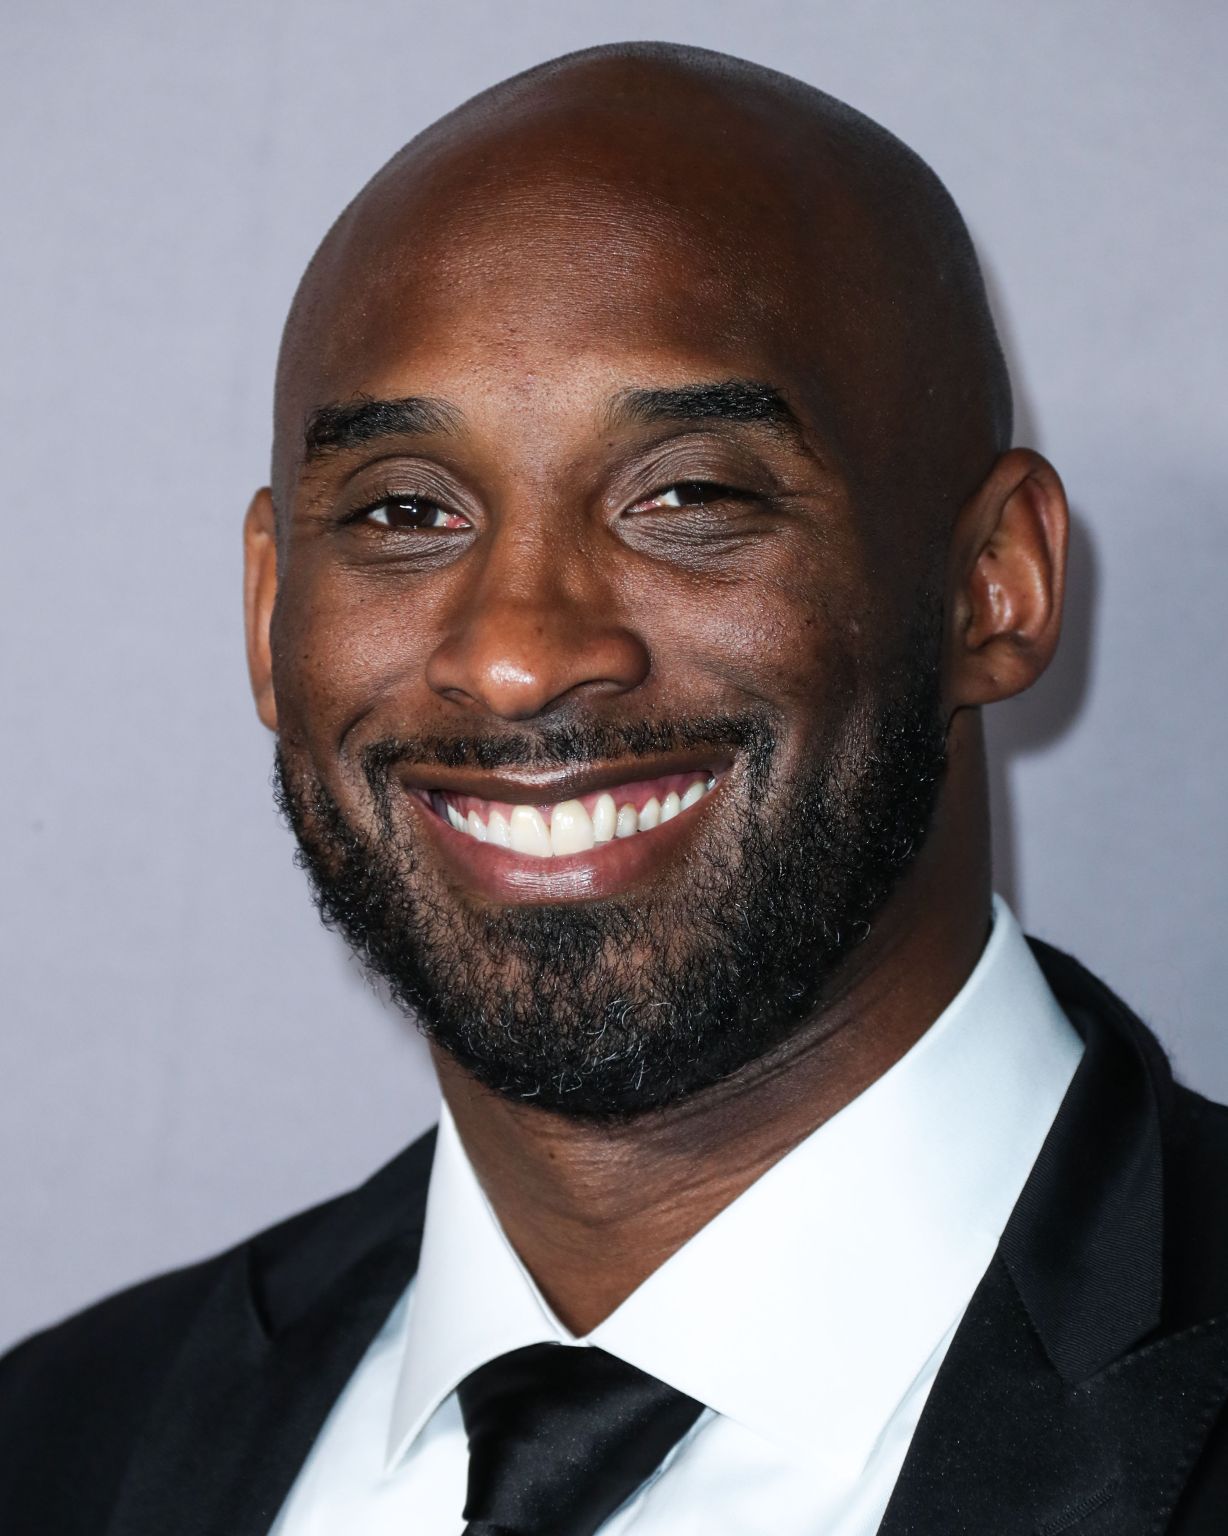 NBA Champion Kobe Bryant Has Died In A Helicopter Crash | MadameNoire